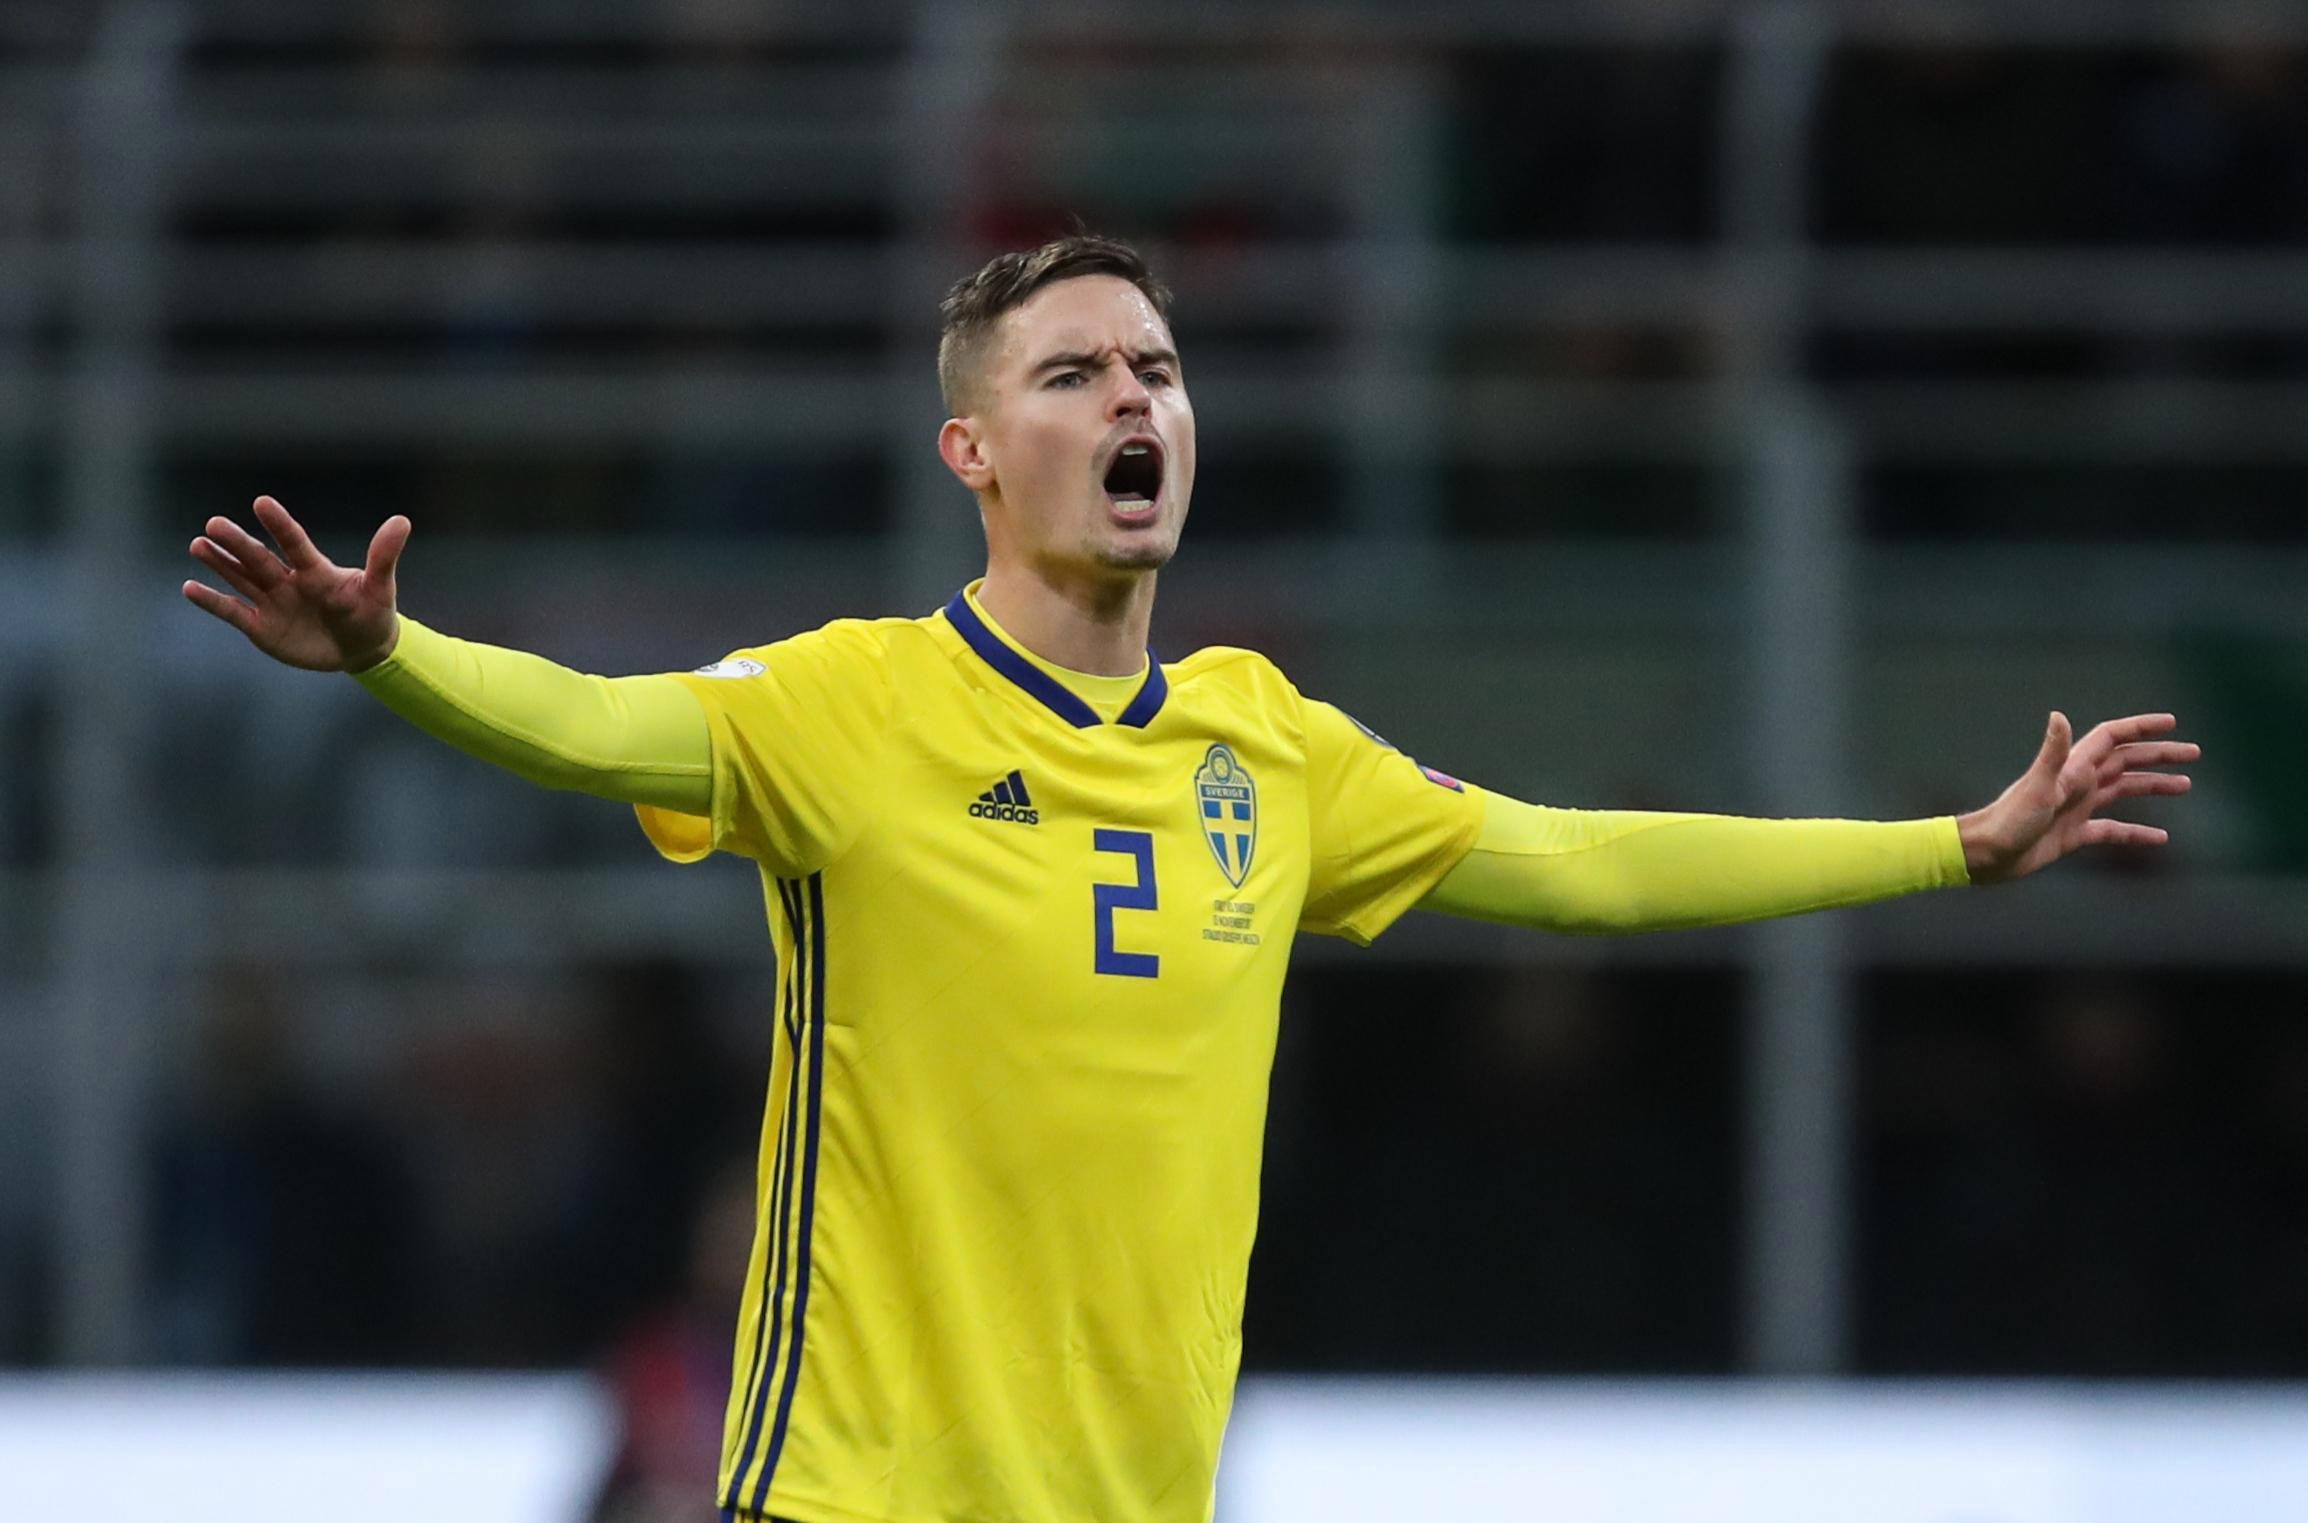 Celtic and Sweden star Mikael Lustig apologises for use of the word 'c***' to slam Italy fans ahead of World Cup qualifier | The Scottish Sun